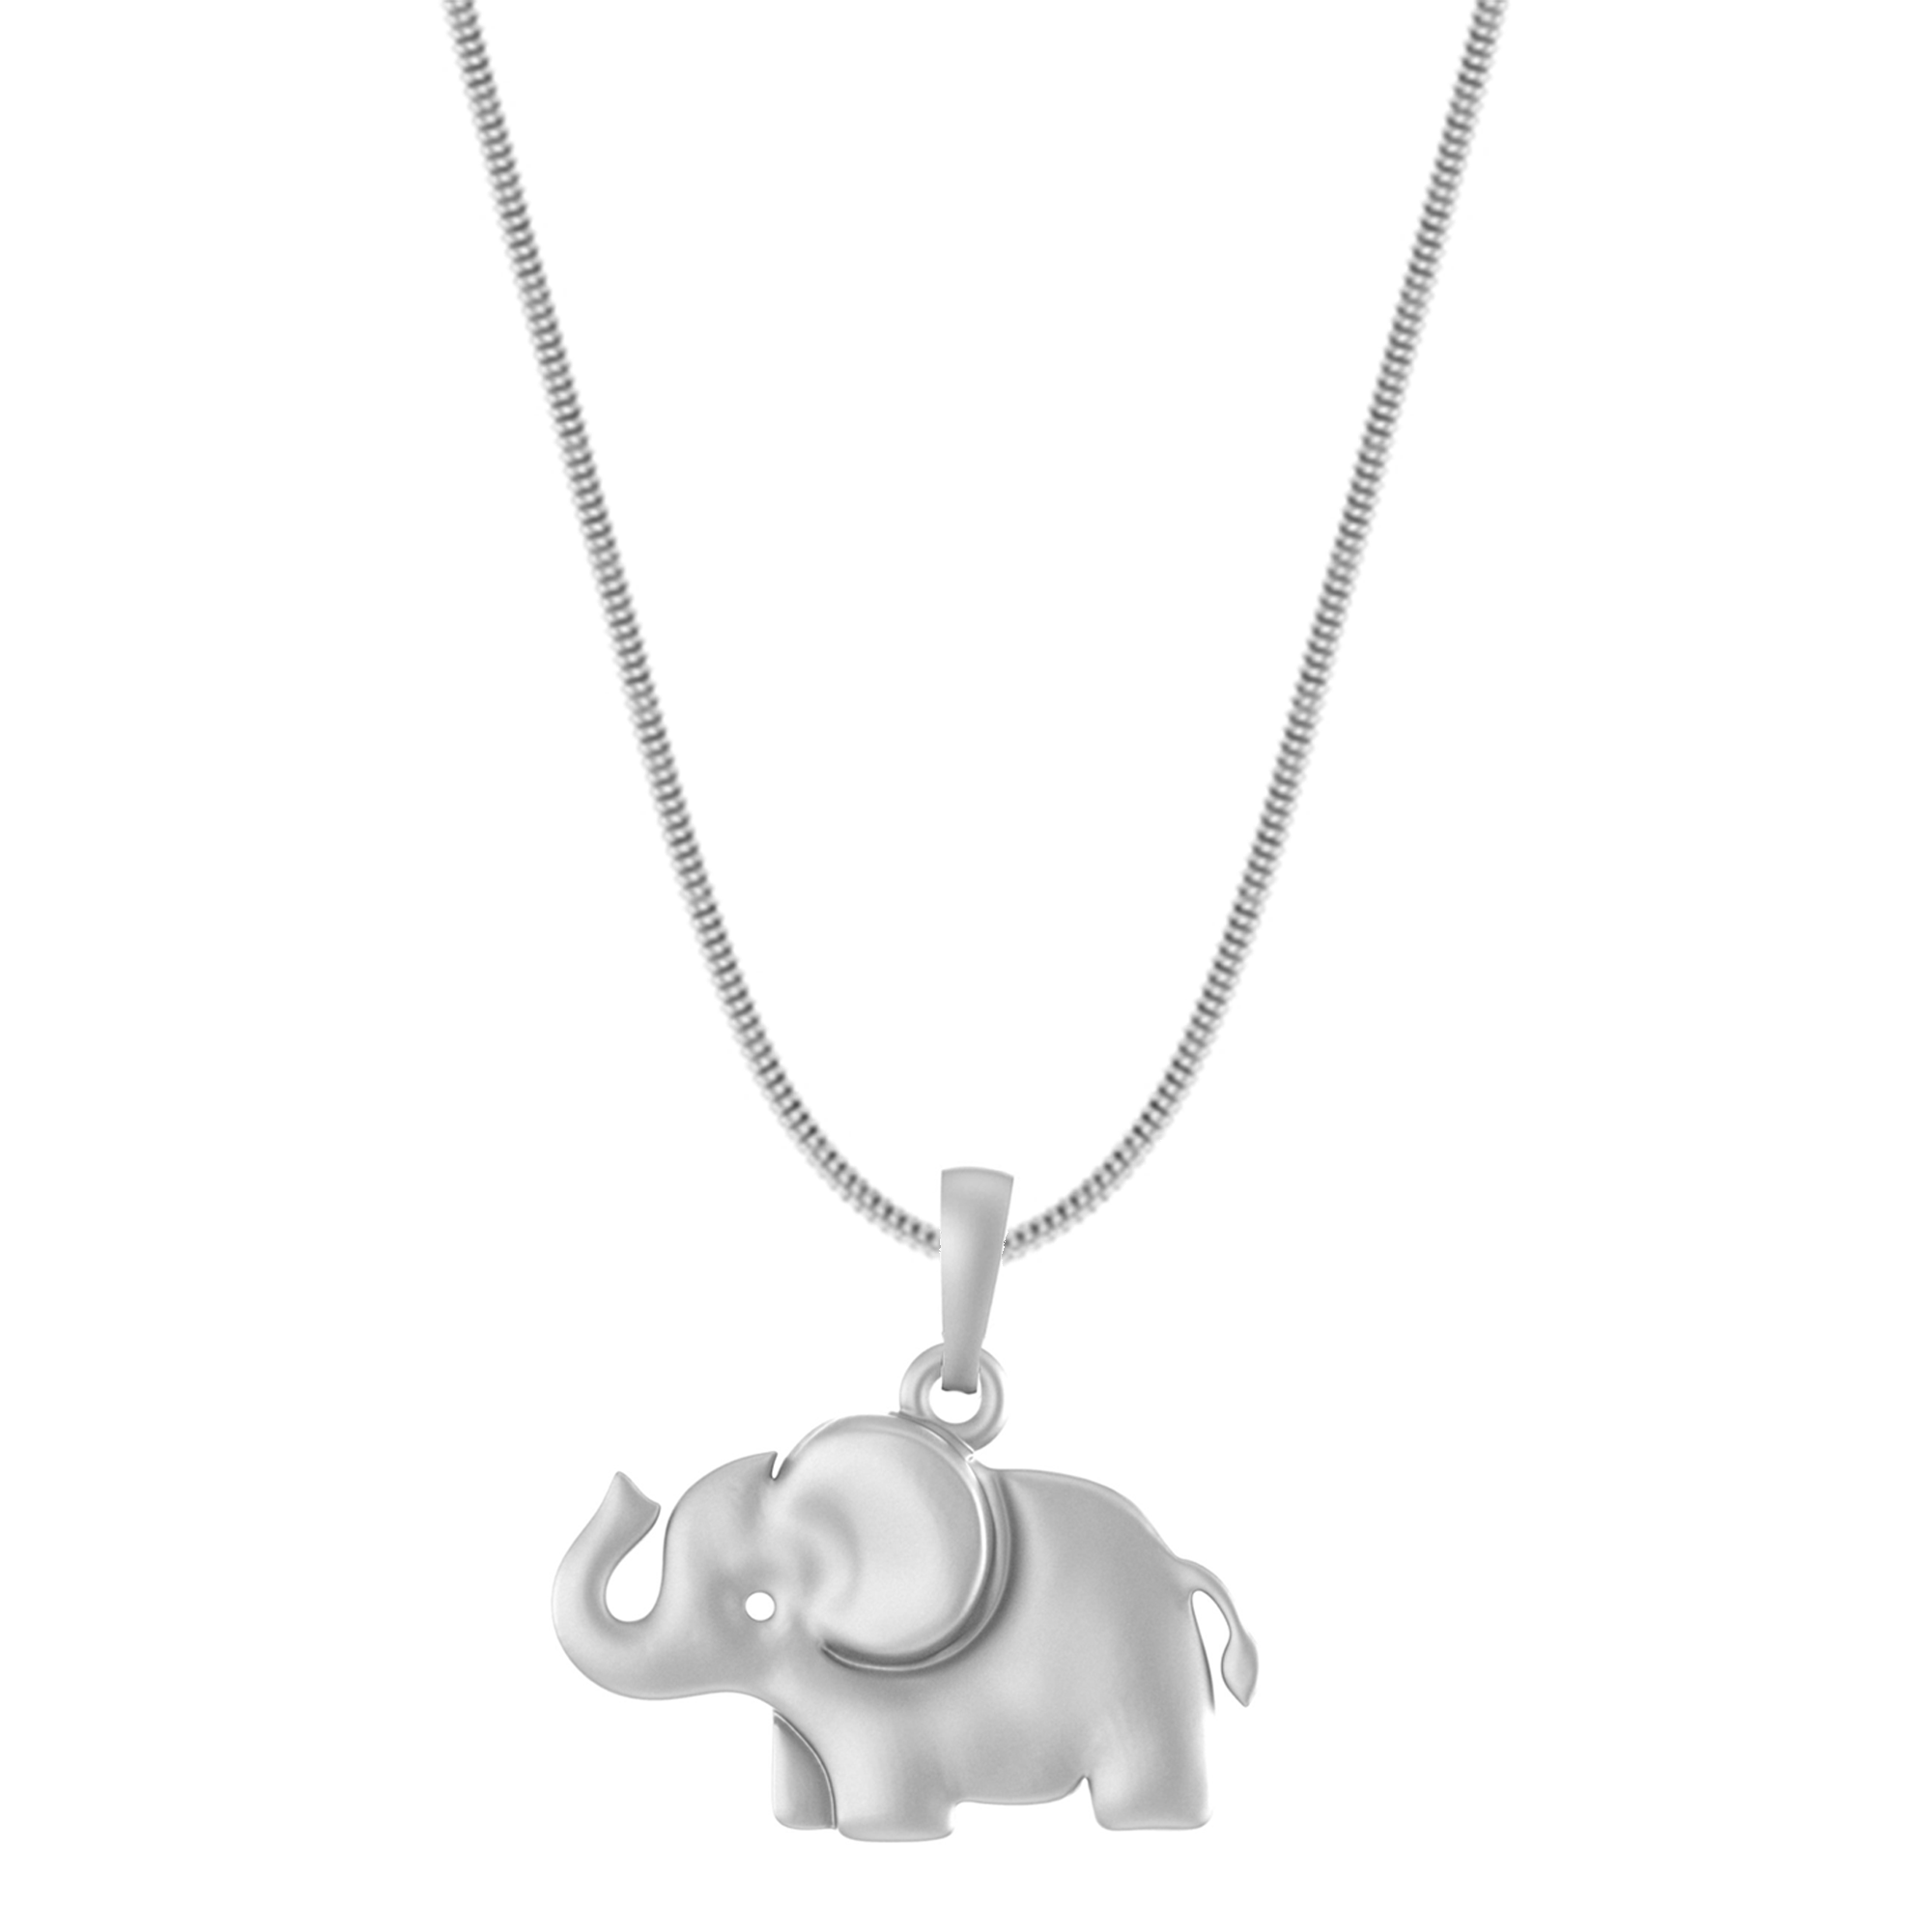 Akshat Sapphire Sterling Silver (92.5% purity) Strength Symbolic Elephant Chain Pendant  (Pendant with Snake Chain) for Men & Women Pure Silver Elephant Chain Locket to represent strength and power